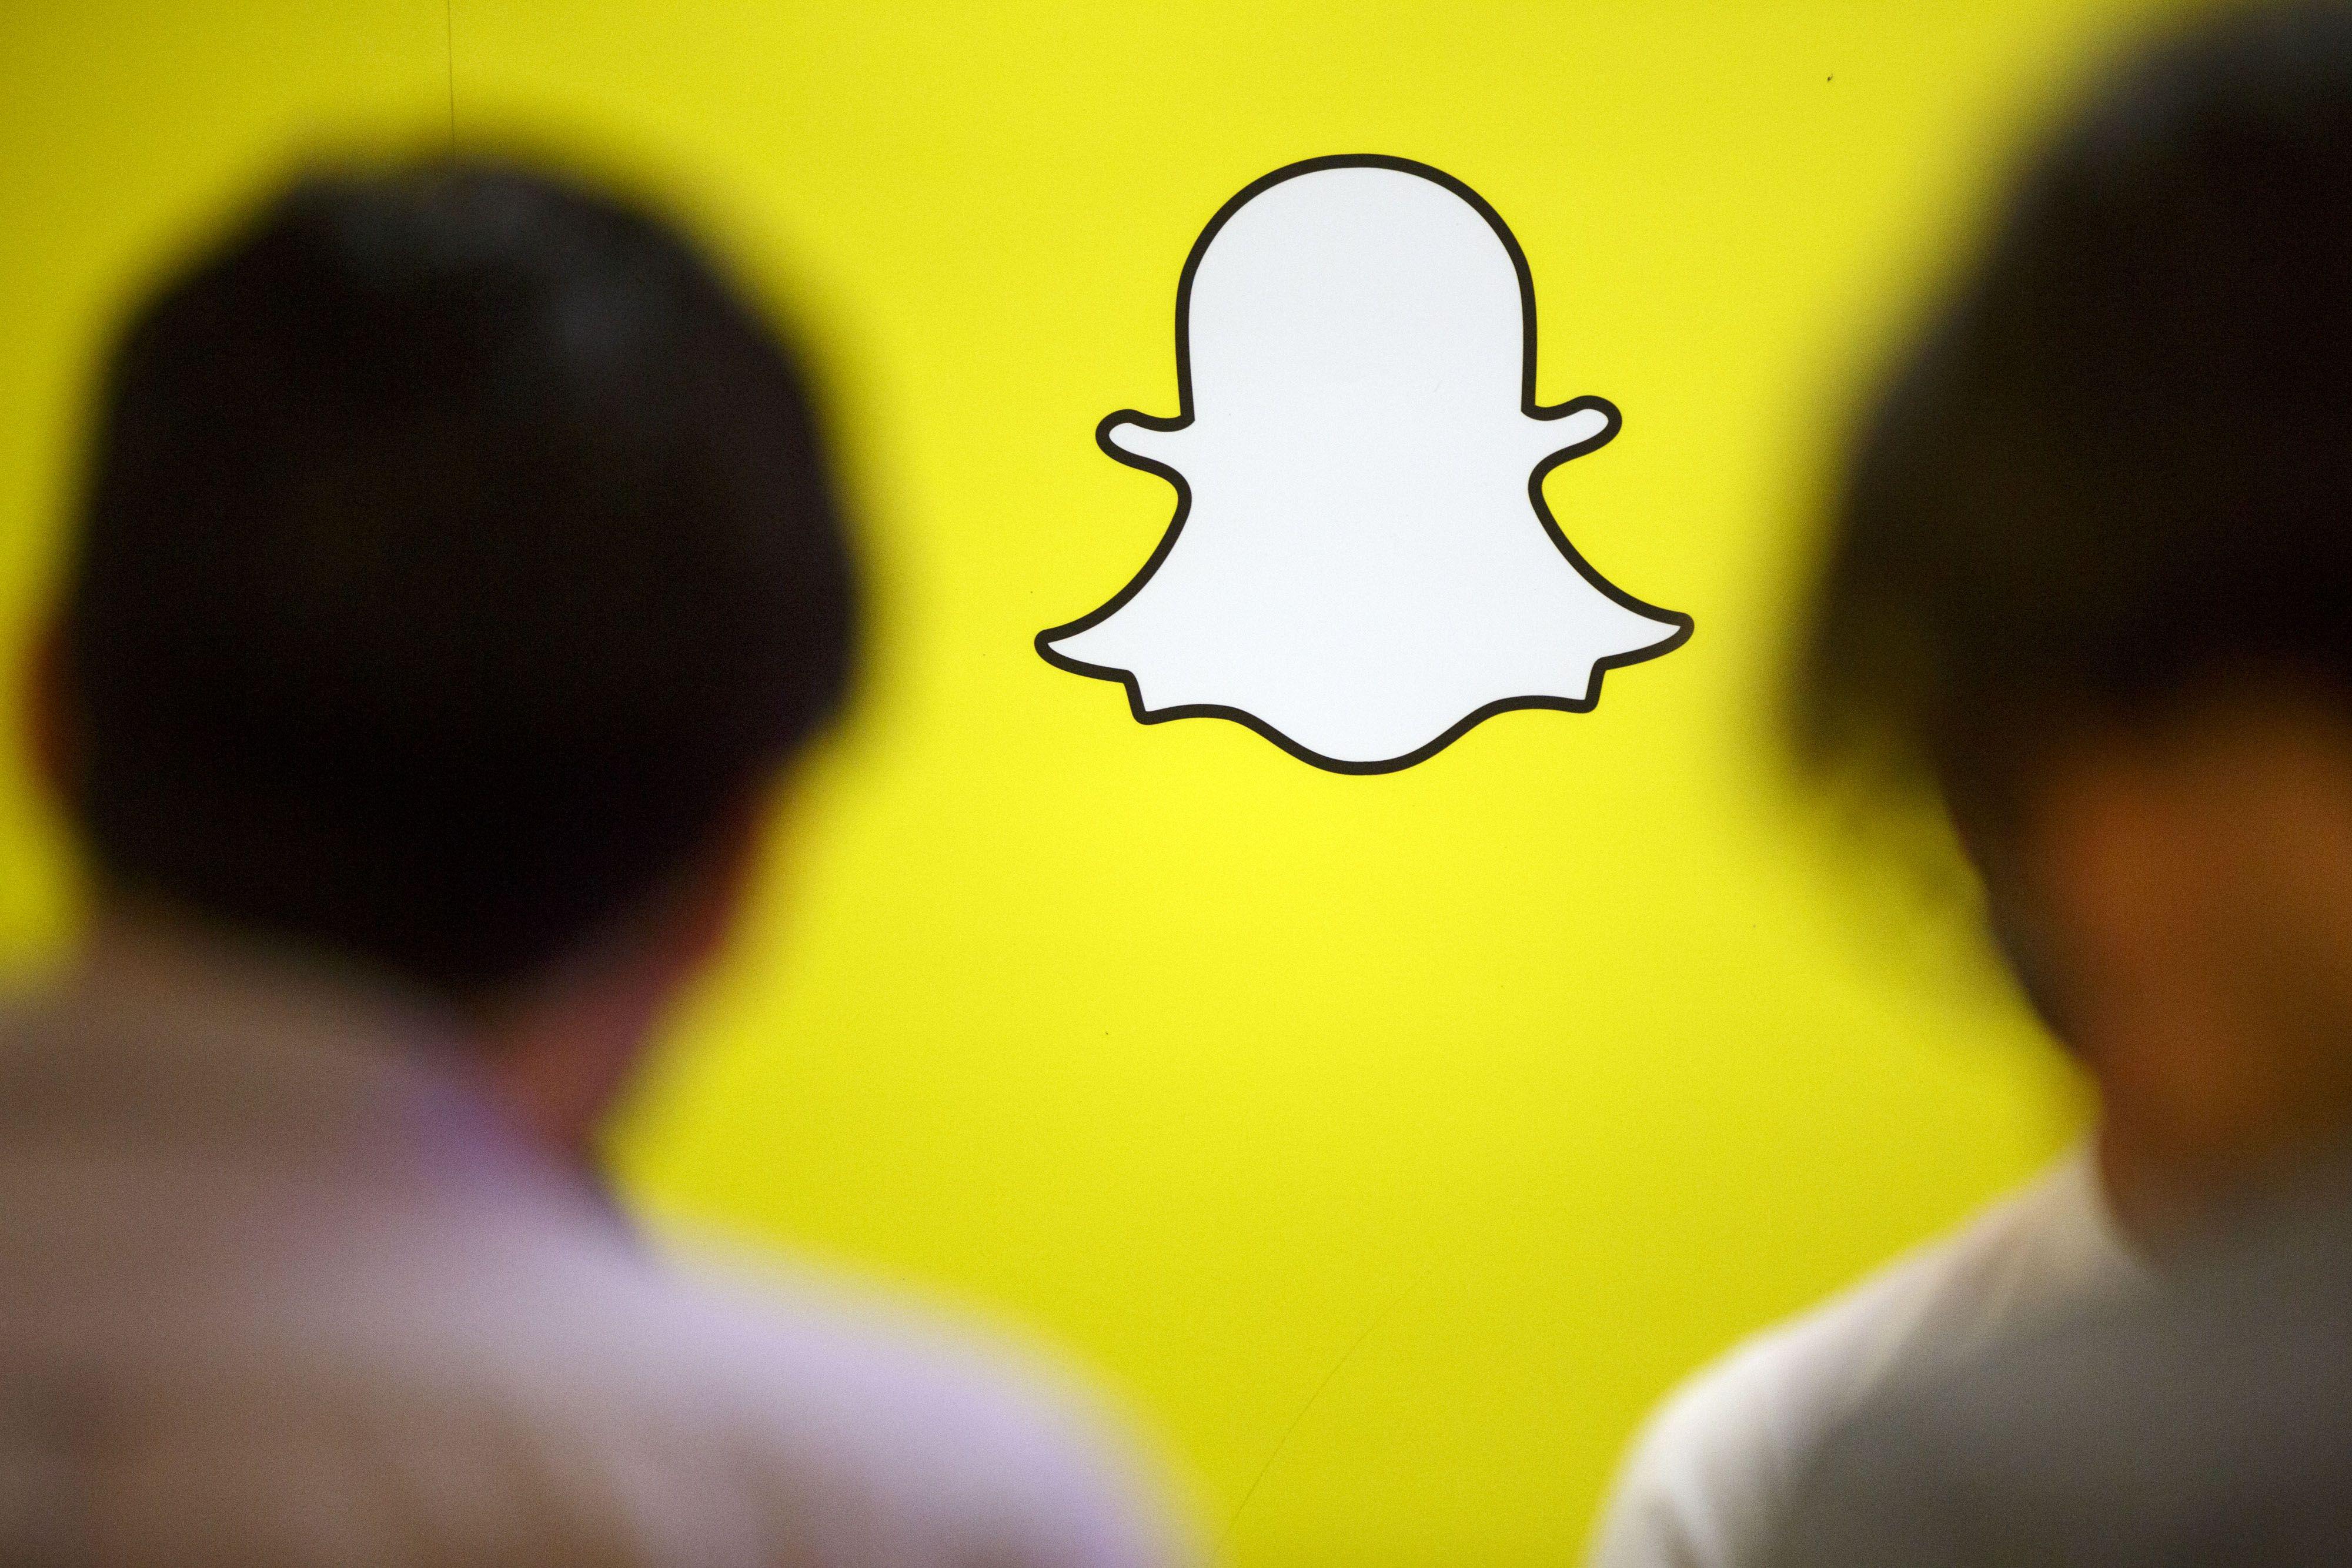 Snapchat Logo - Snapchat: Massive Hack Claim in India Appears to Be Bogus